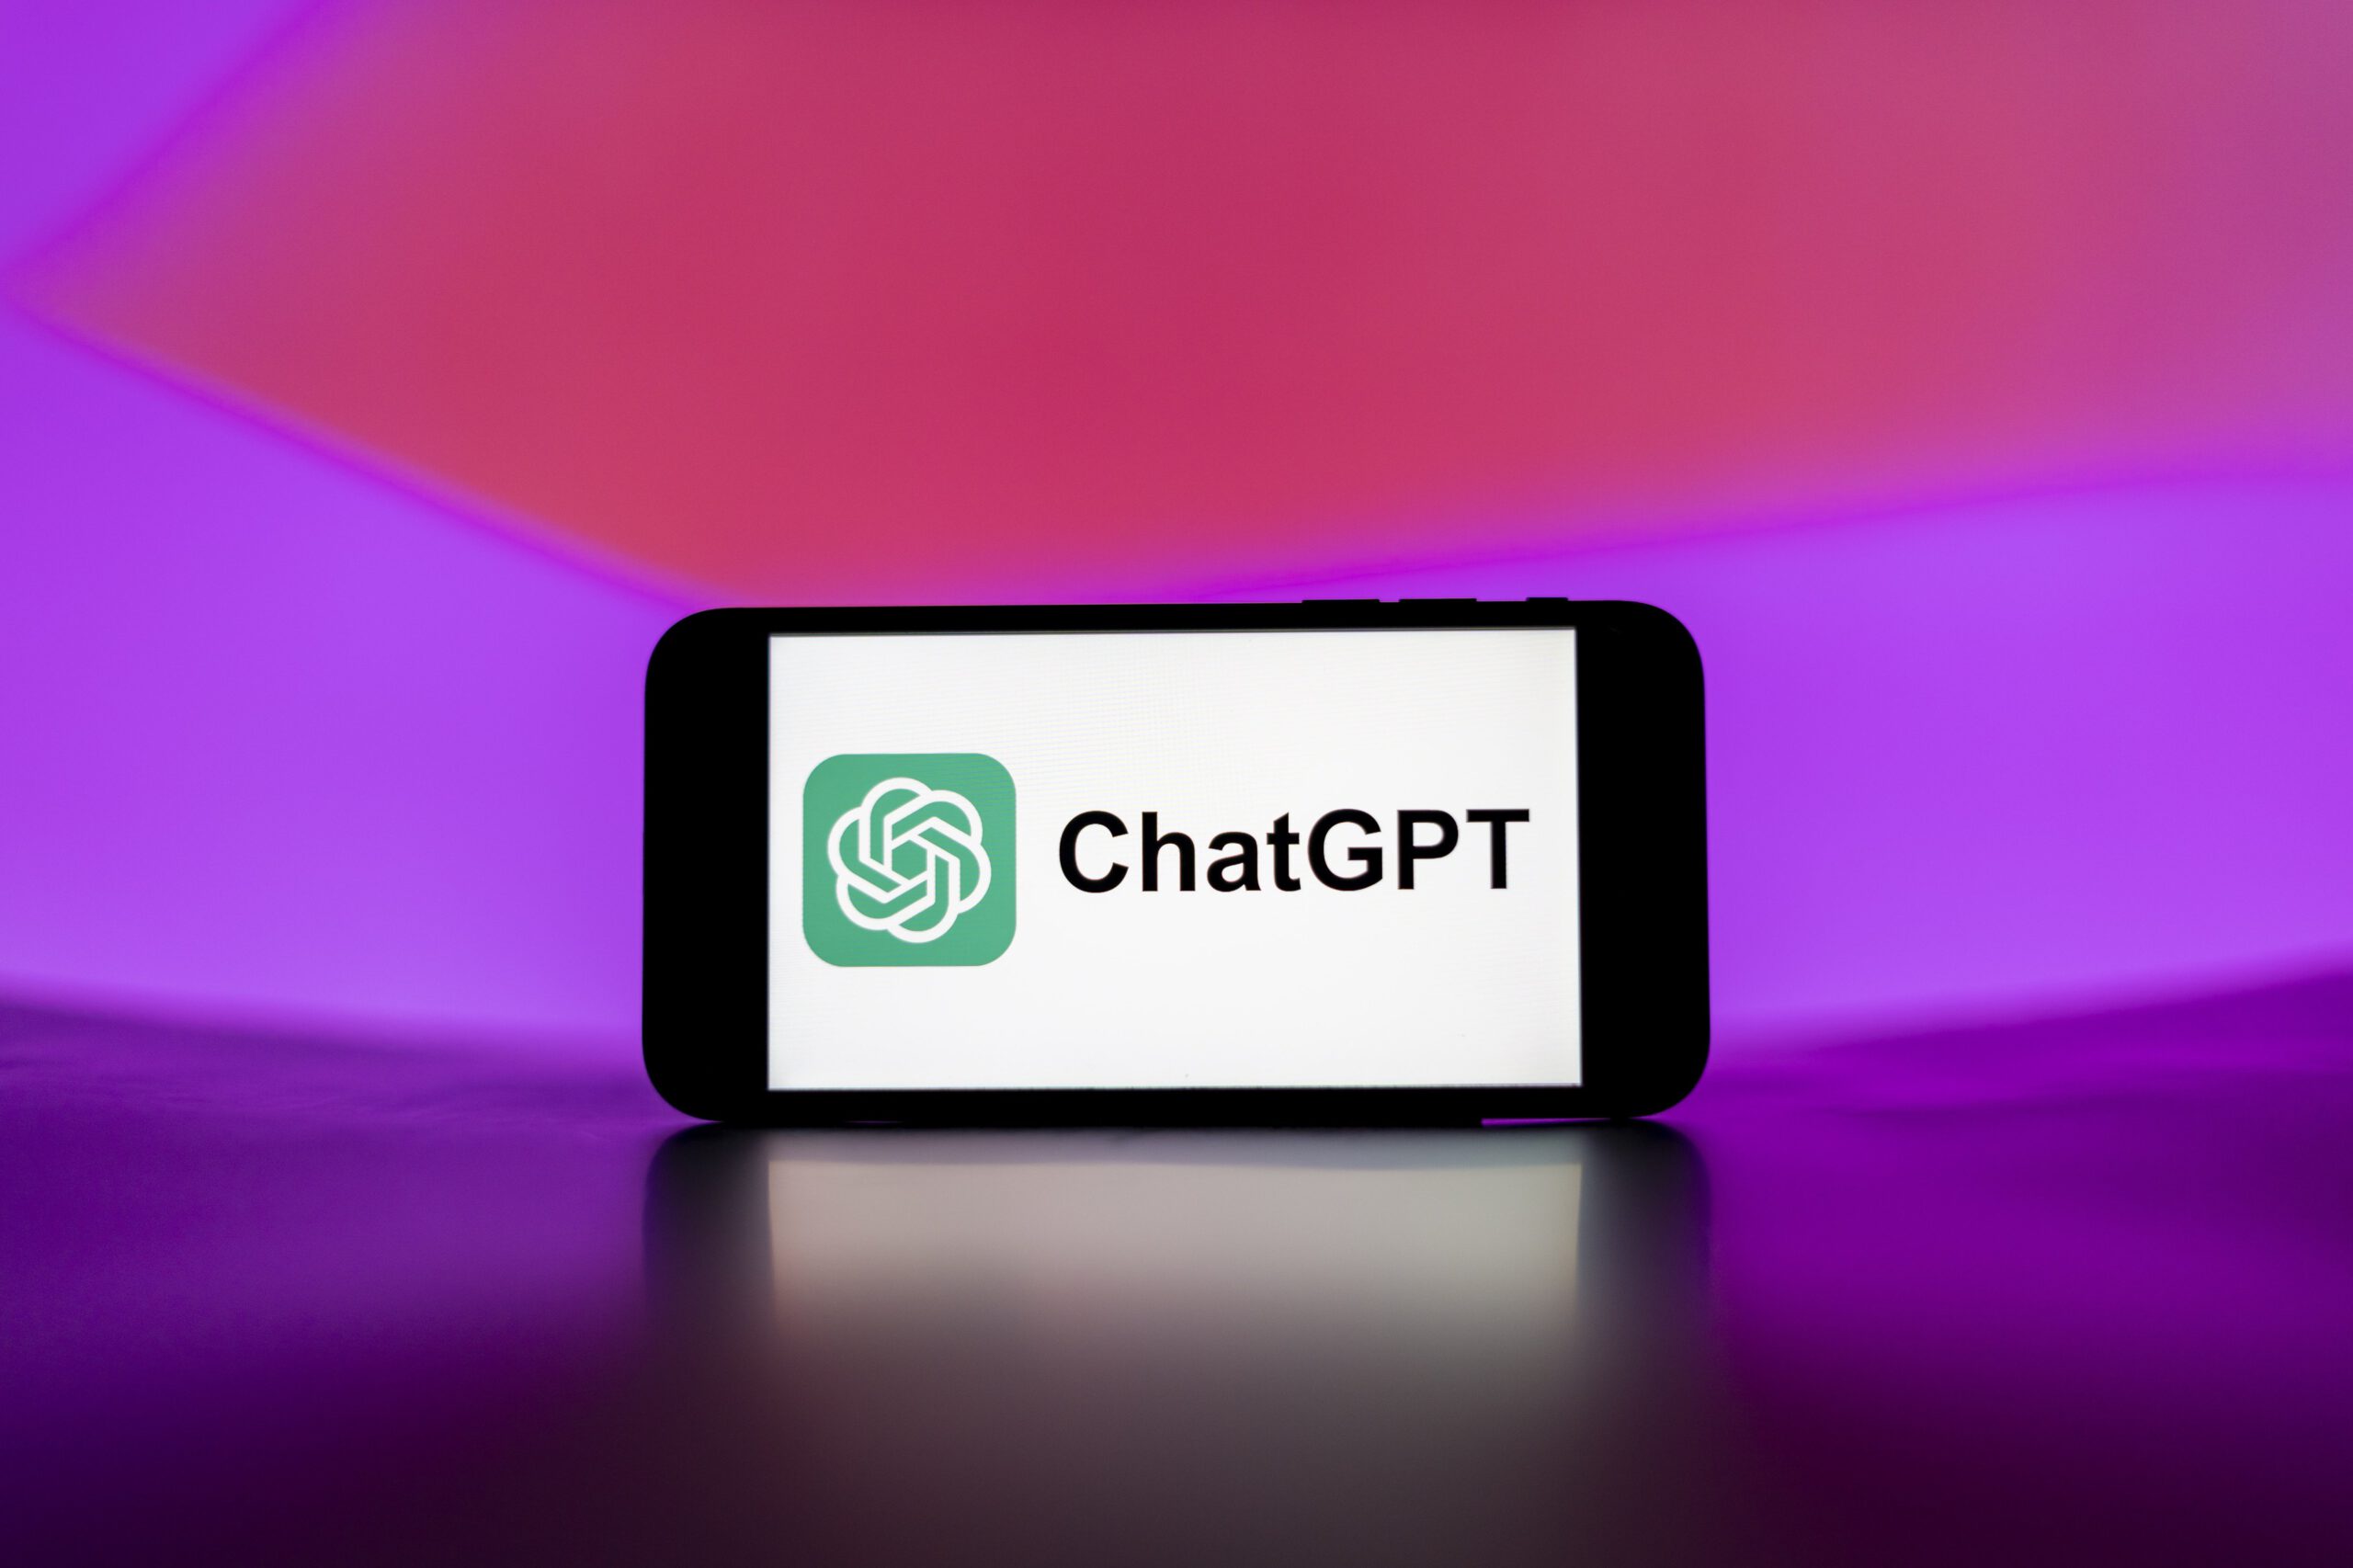 ChatGPT on mobile device